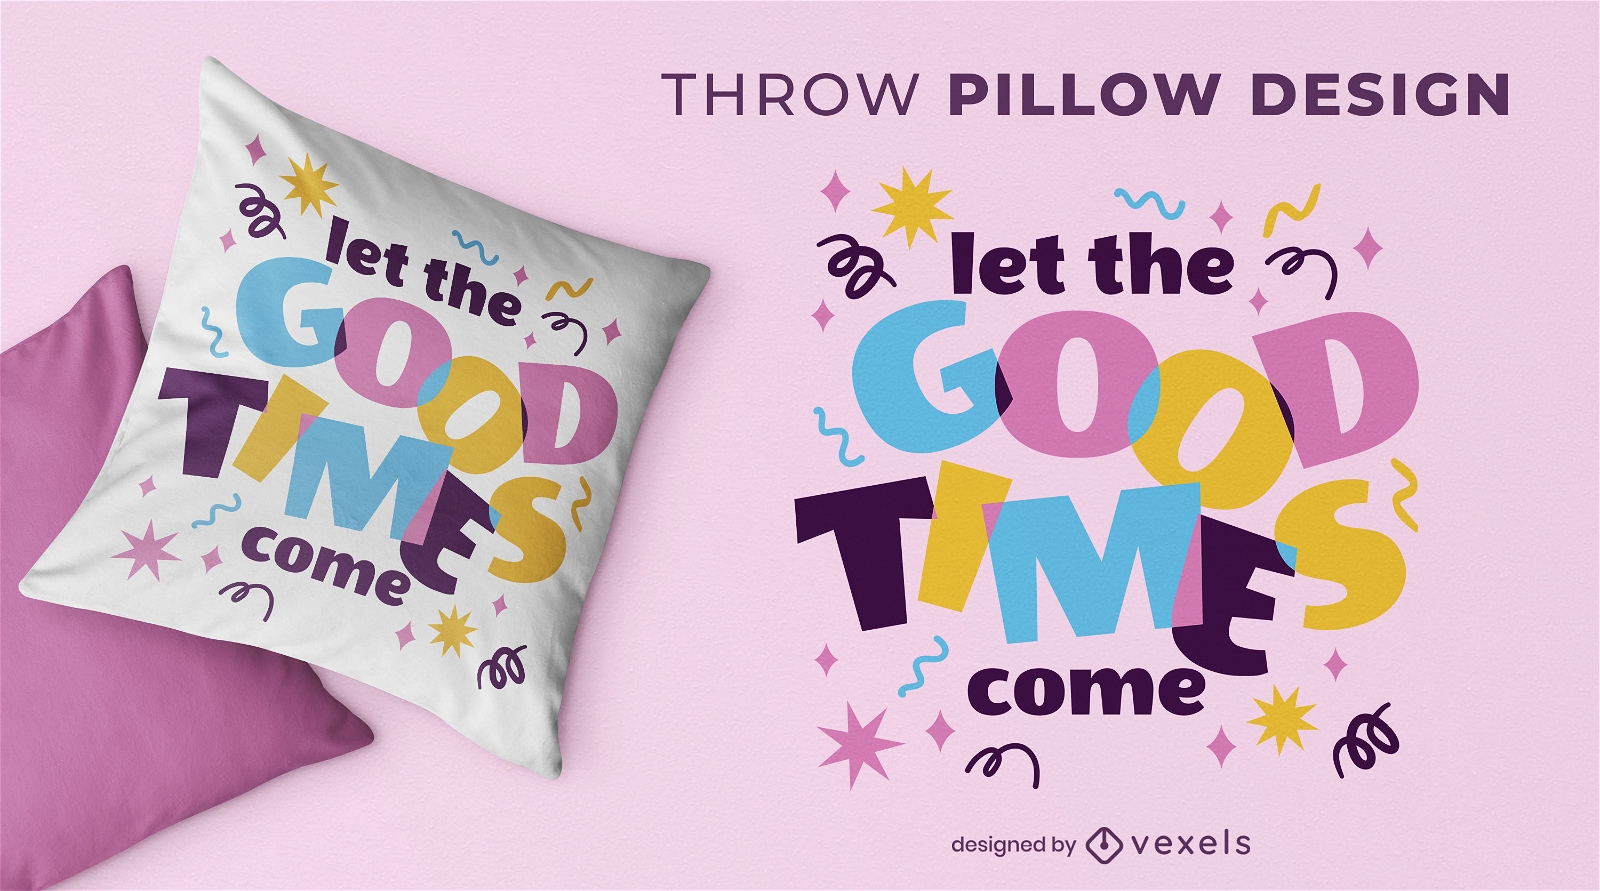 Good times quote throw pillow design